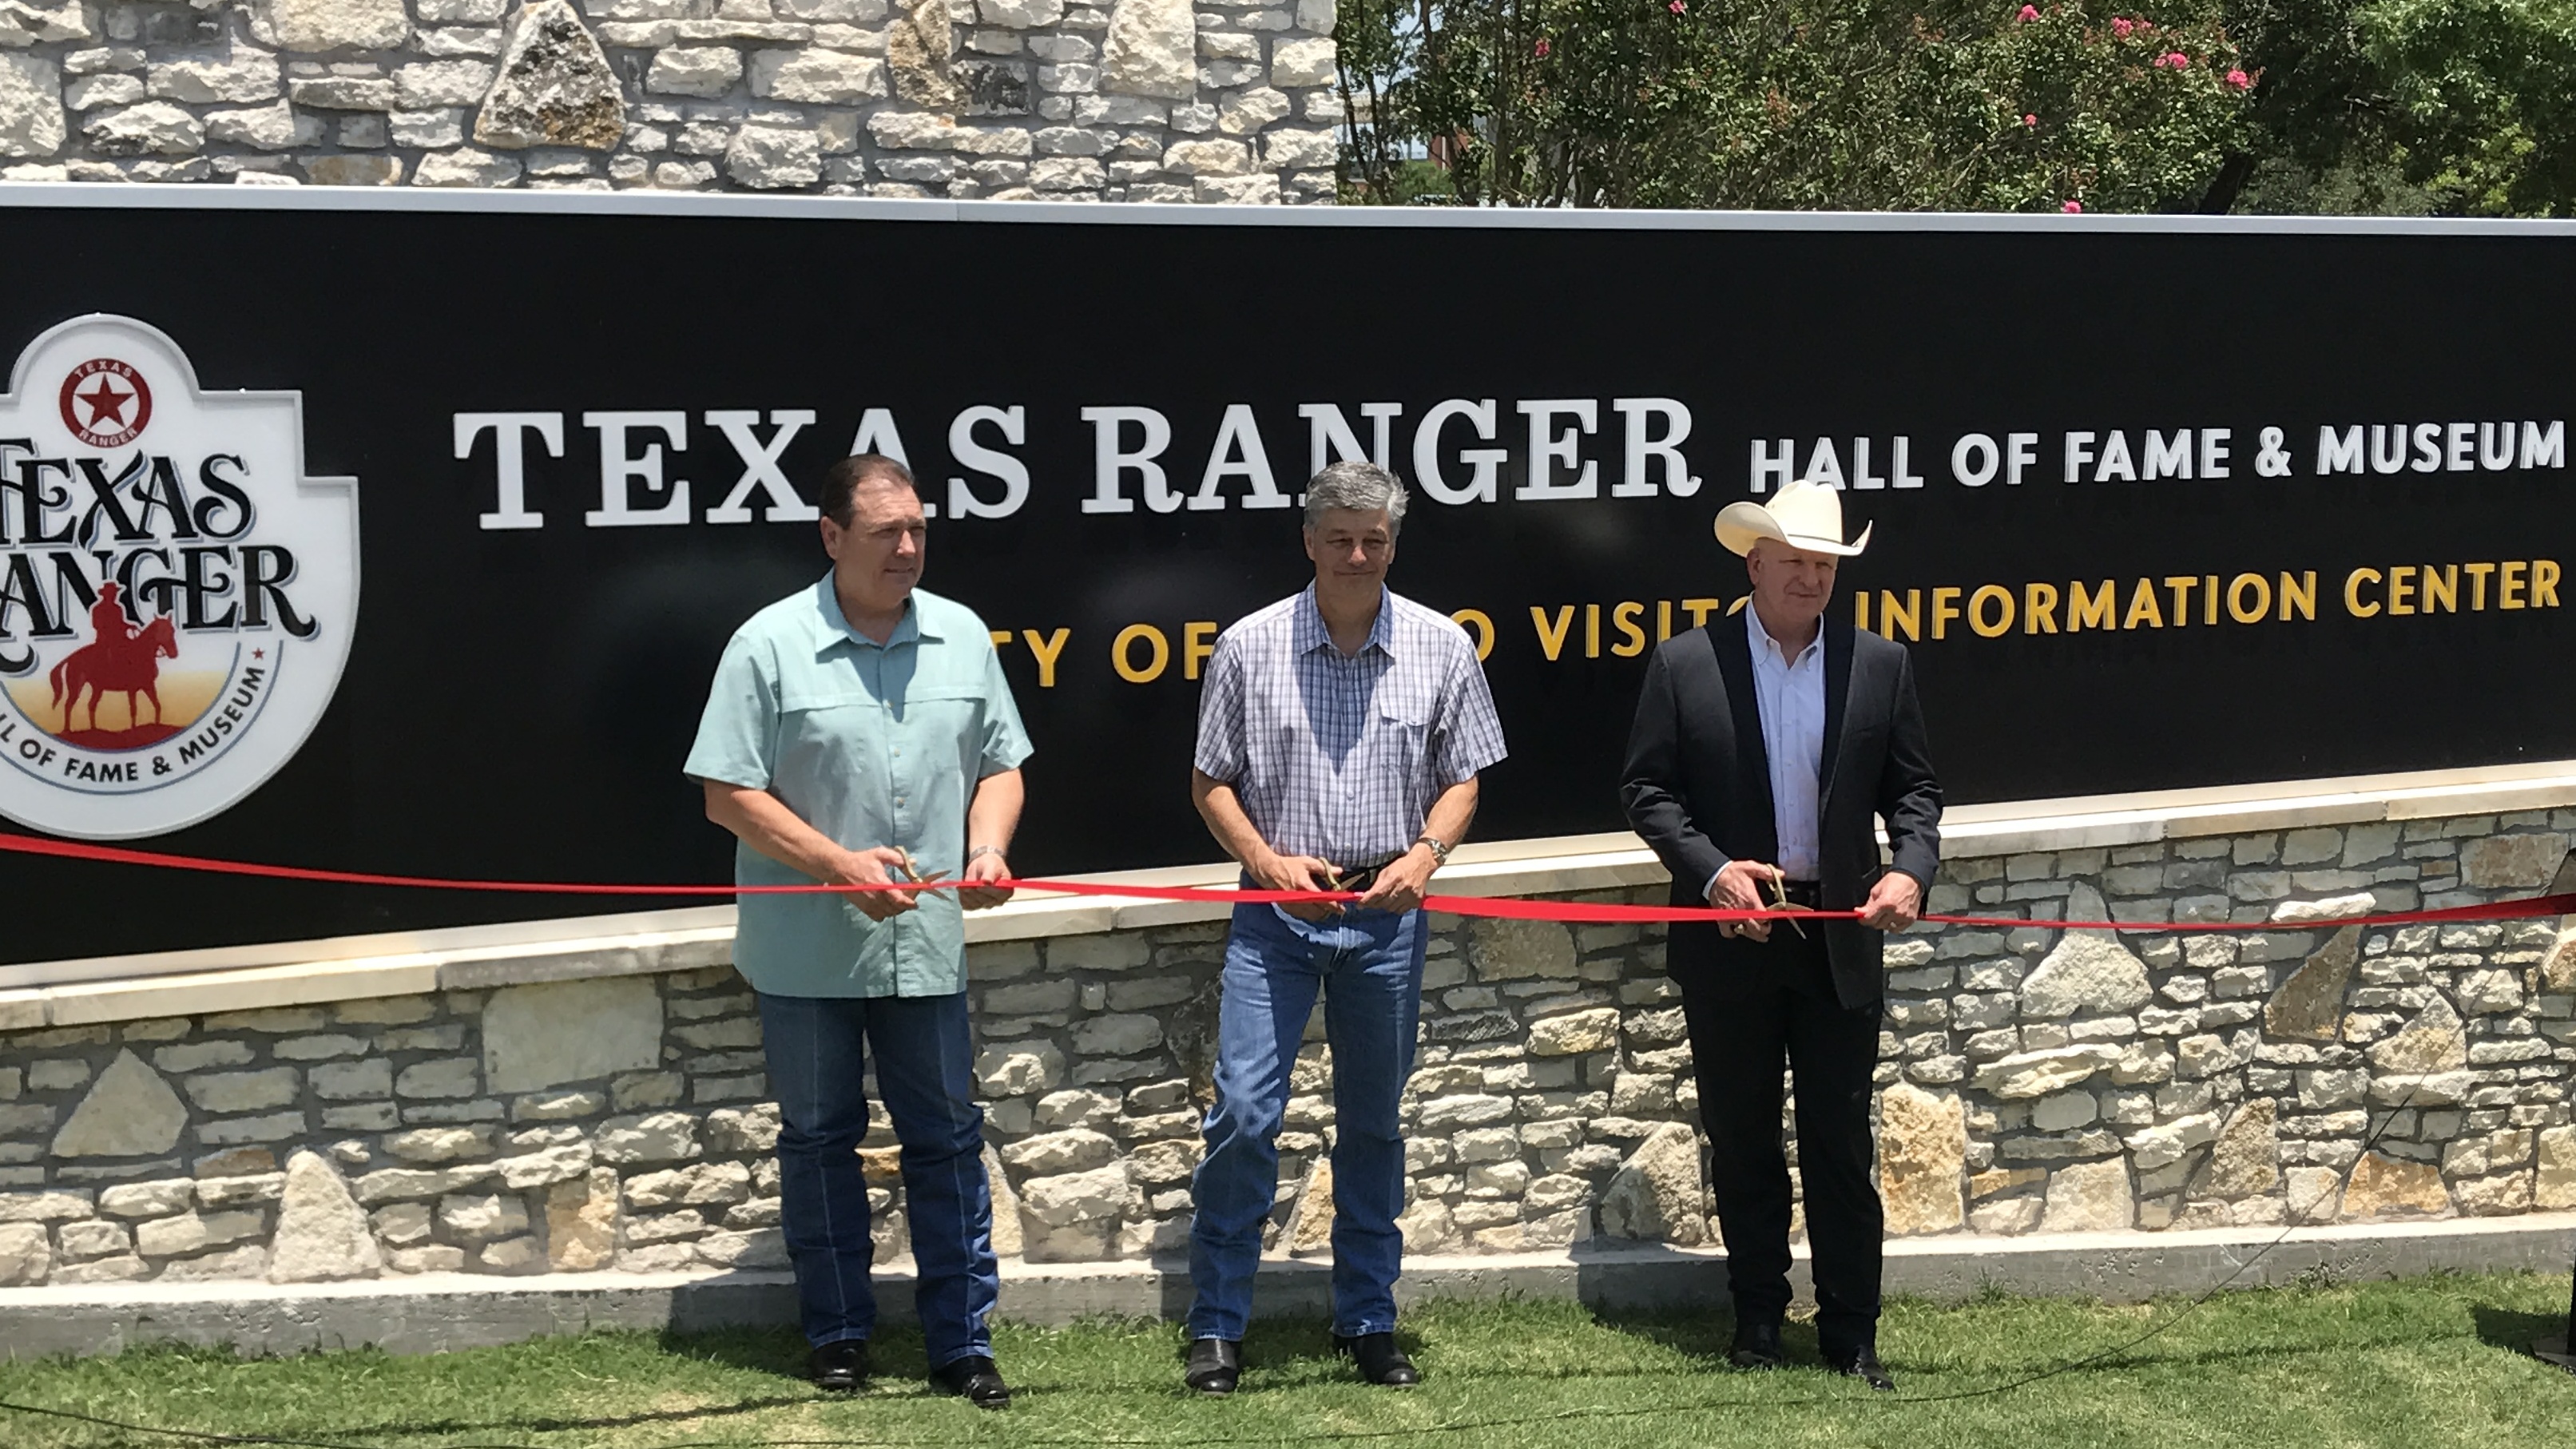 Waco: Texas Ranger Hall of Fame and Museum has new sign